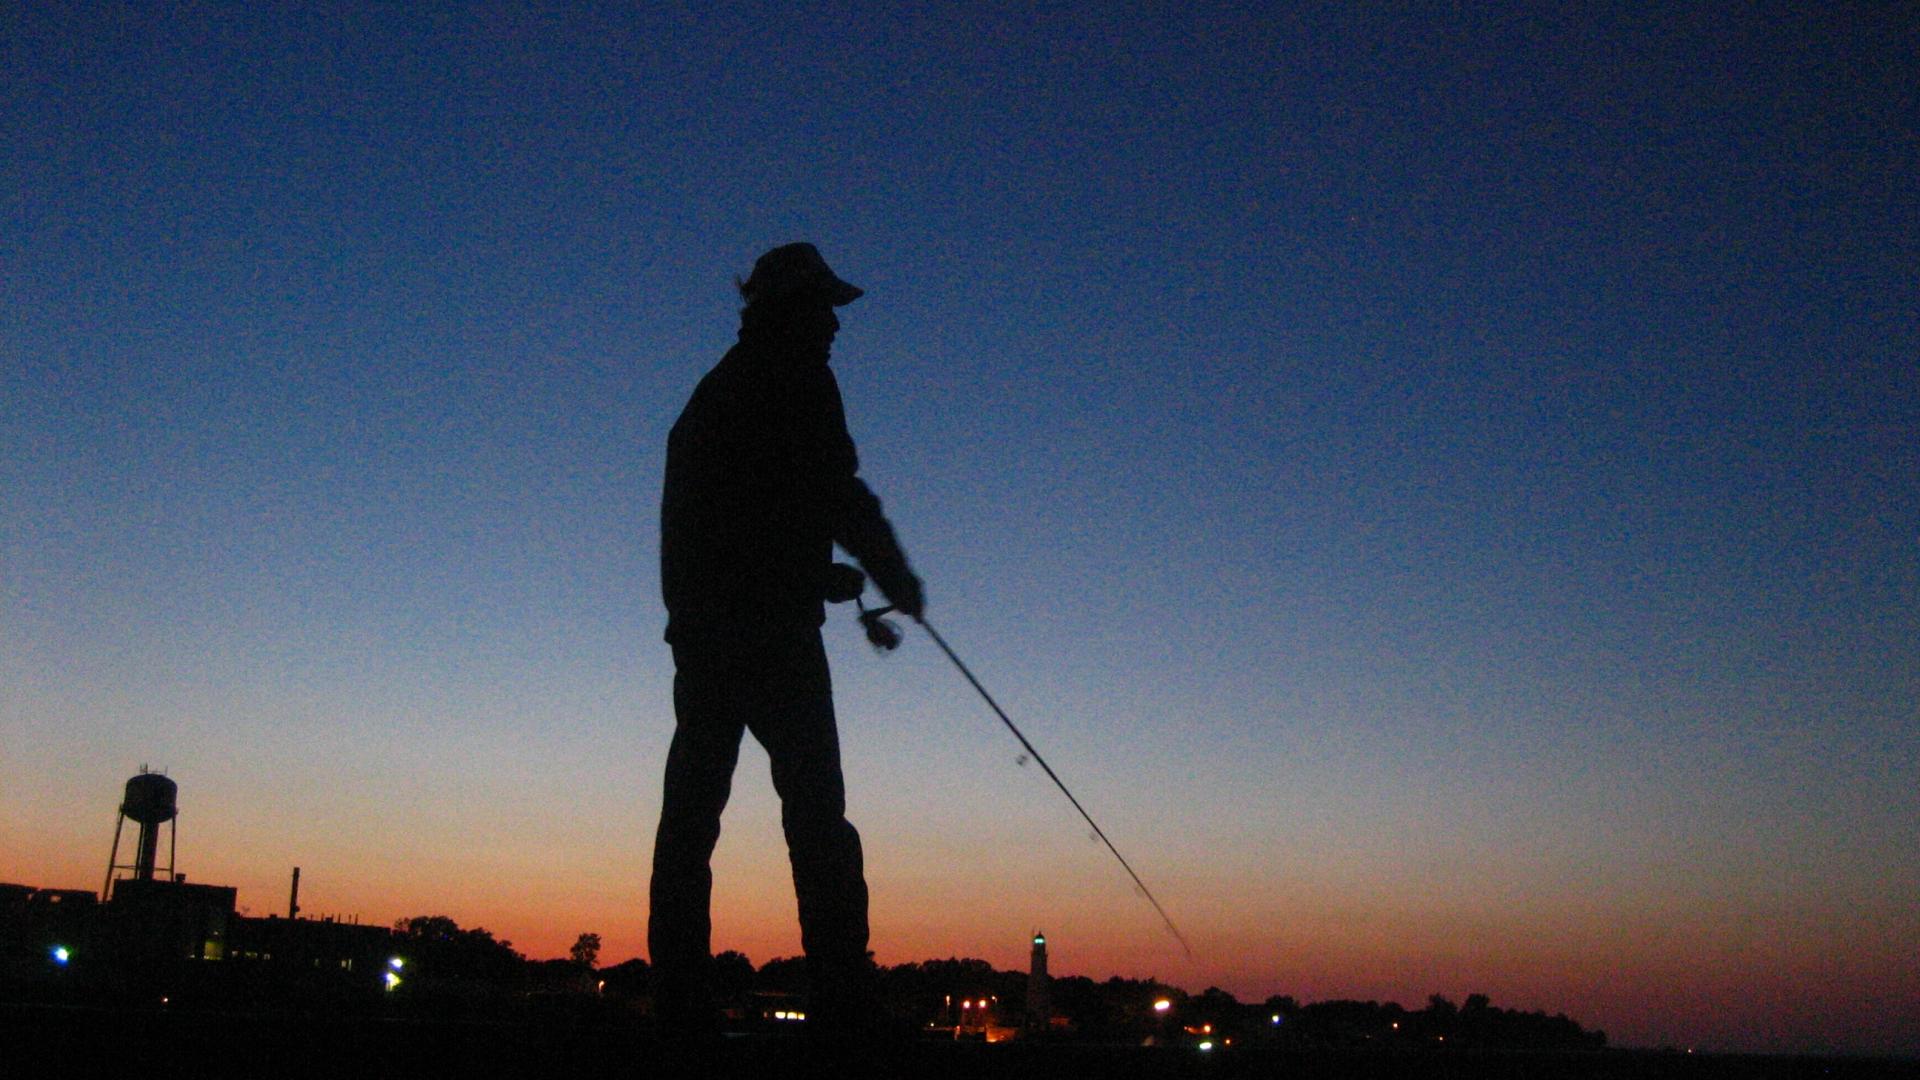 Silhouette of a fisherman fishing. The background is a gradient of dark blue on the top and orange near the horizon. 